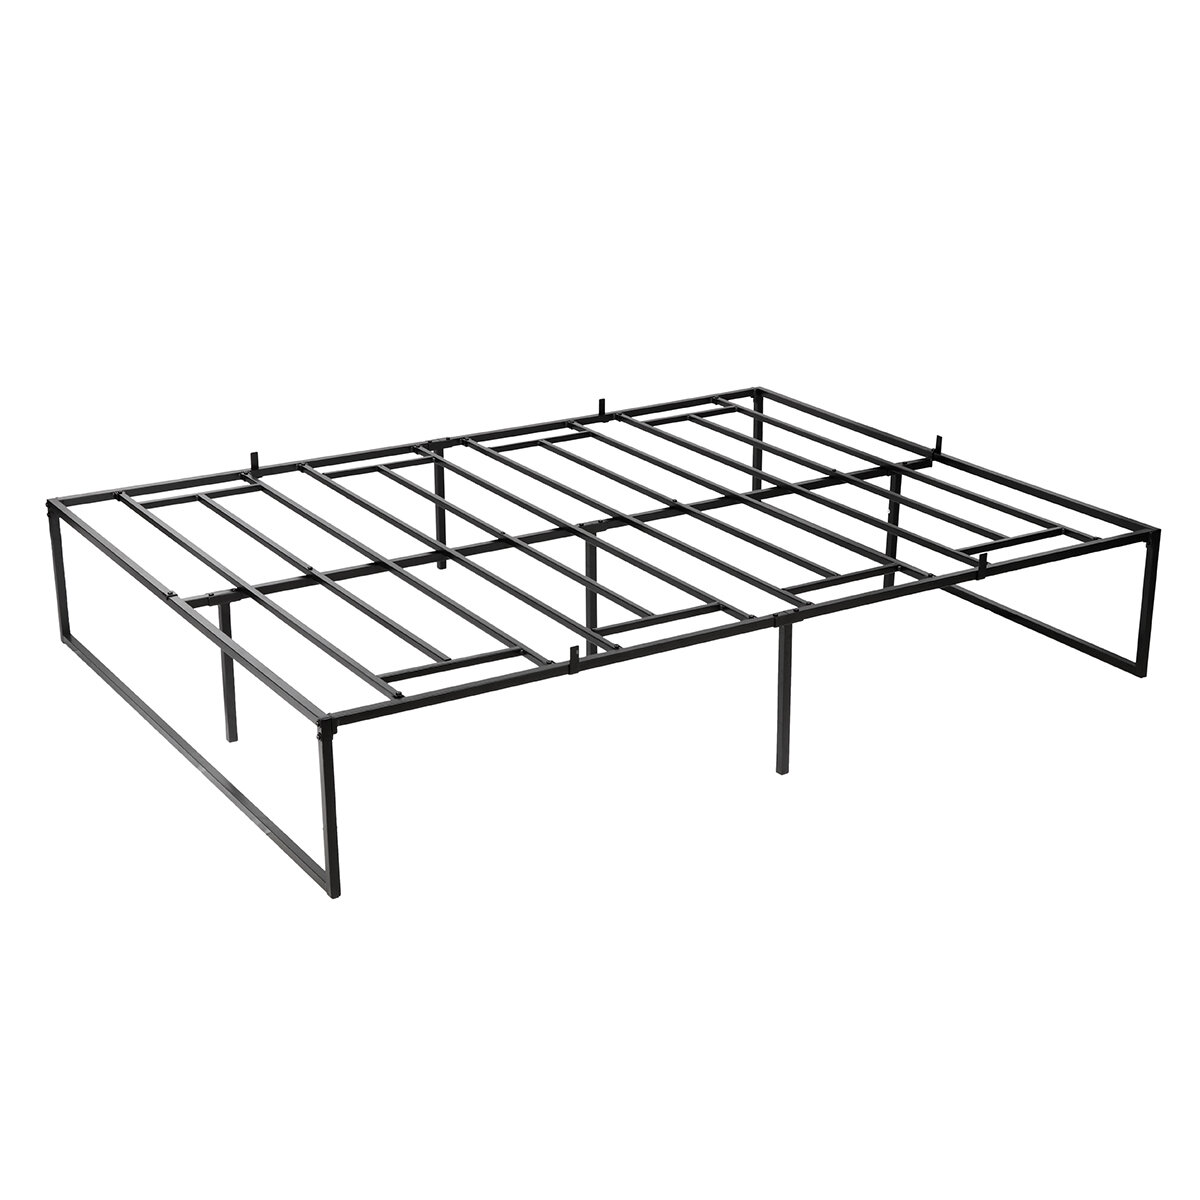 Queen Bed Frame, 14 Inch Platform Bed Frame, Metal Queen Size Bed Frame with Storage , Heavy Duty Steel Slat and Anti-Sl